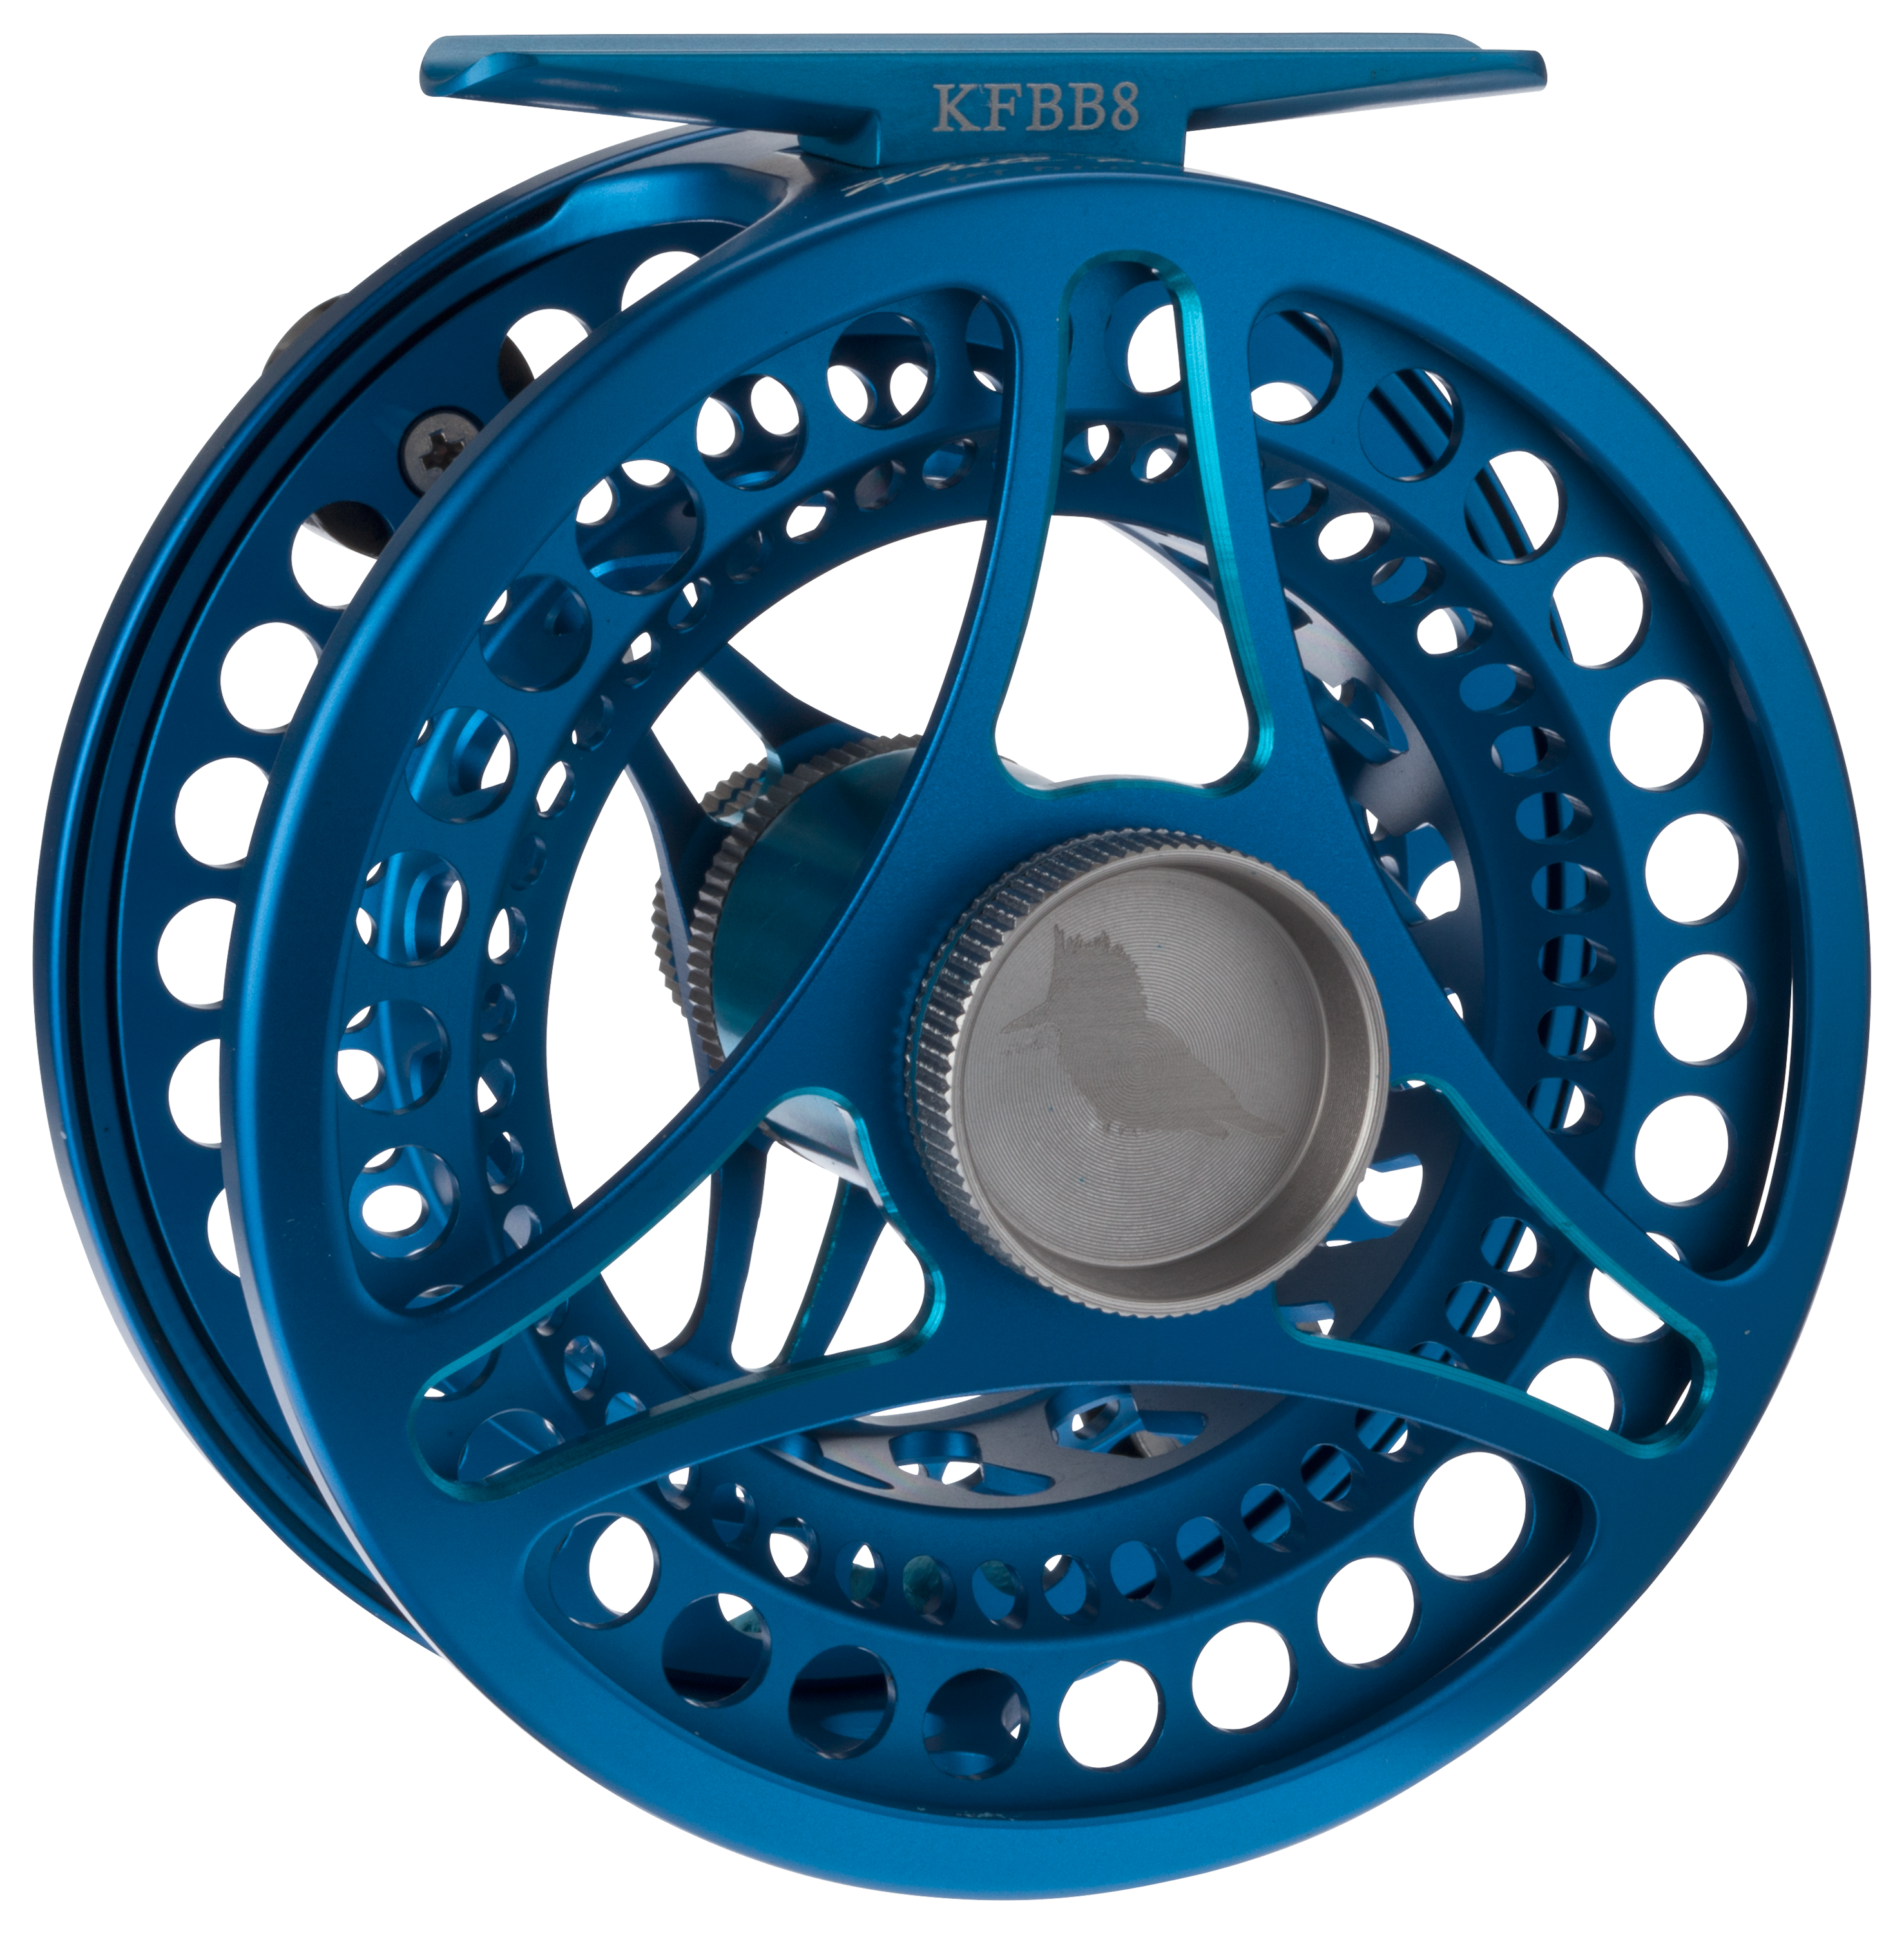 White River Fly Shop Kingfisher Fly Reel - 3/4 Line WT - Tactical Black